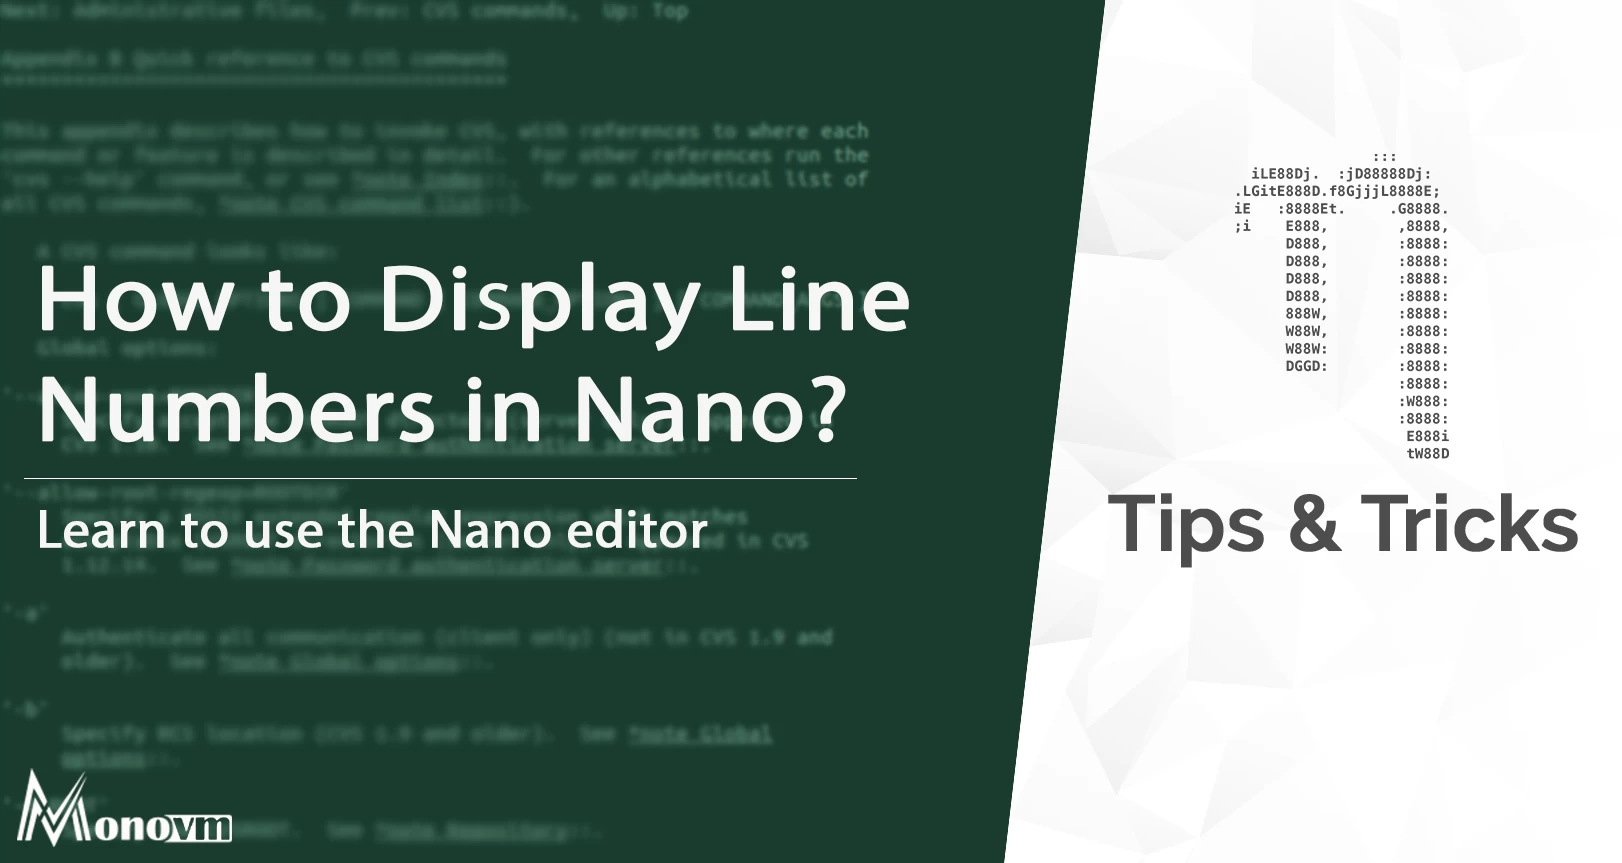 How to Show Line Numbers in Nano Editor?